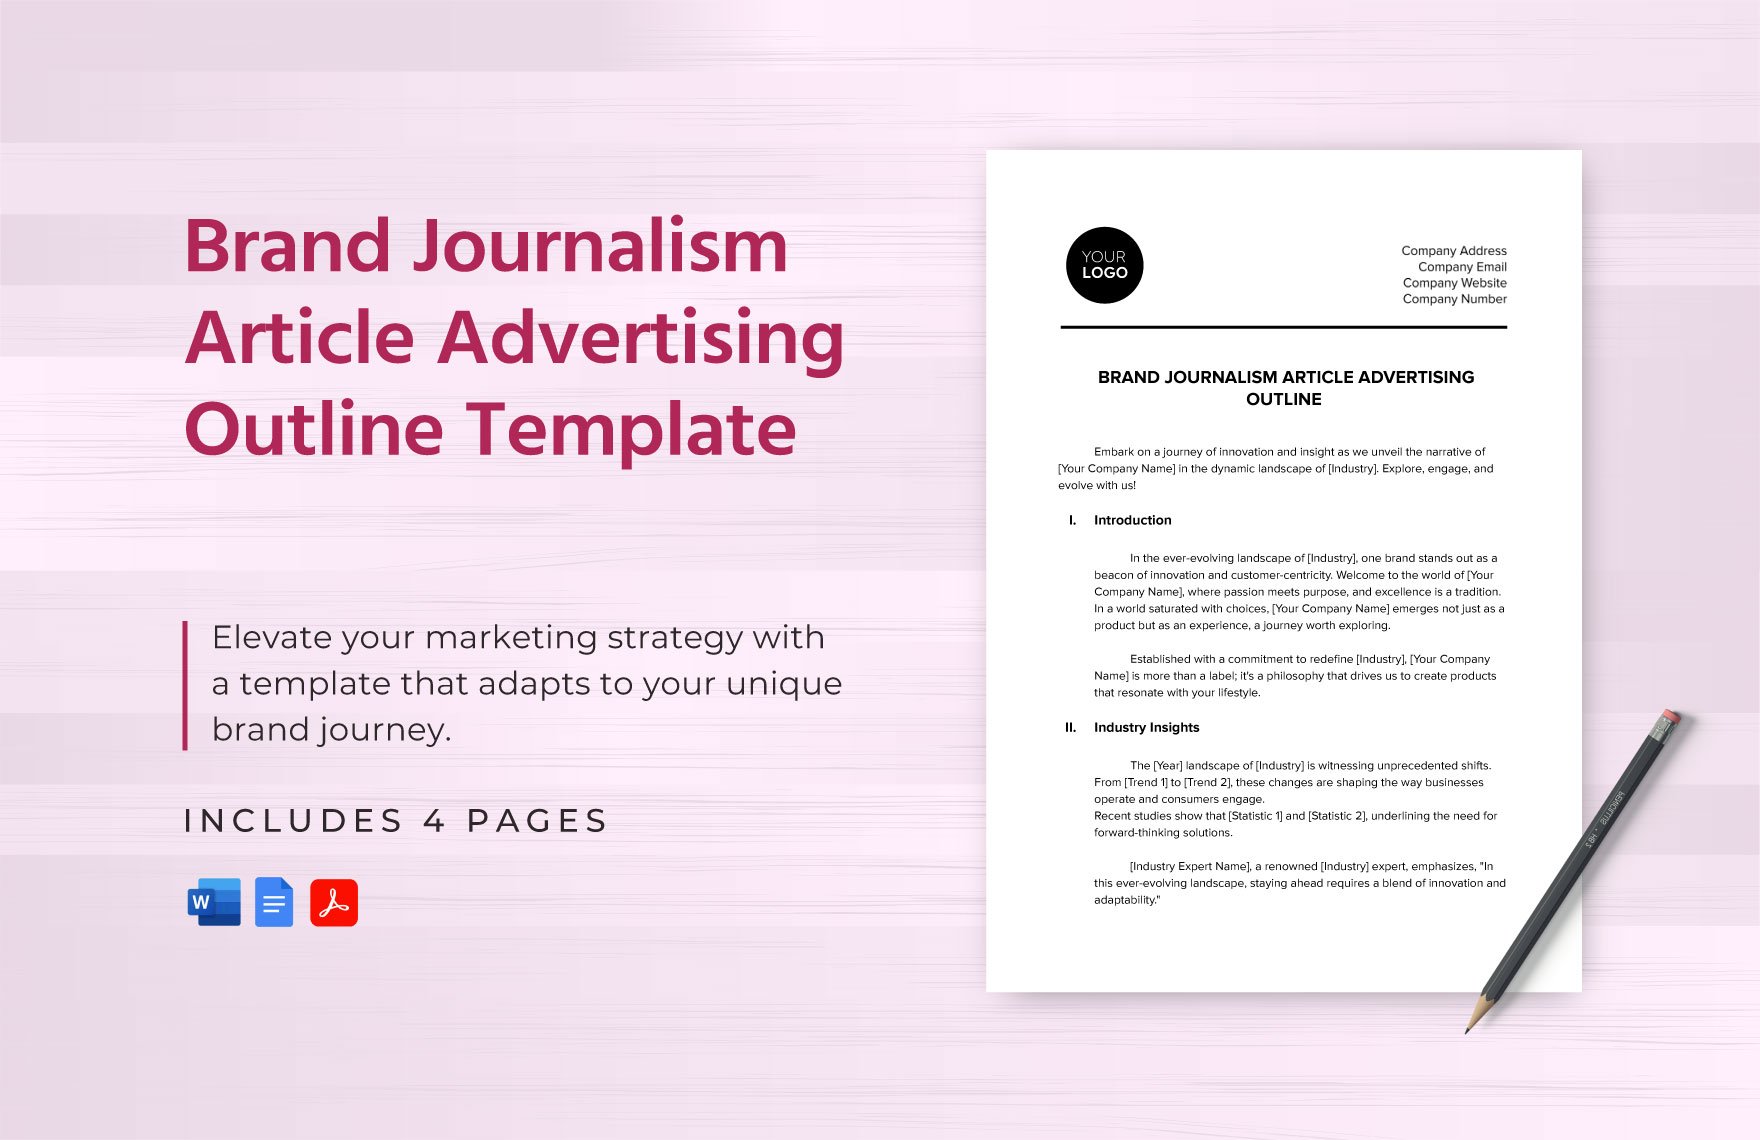 Brand Journalism Article Advertising Outline Template